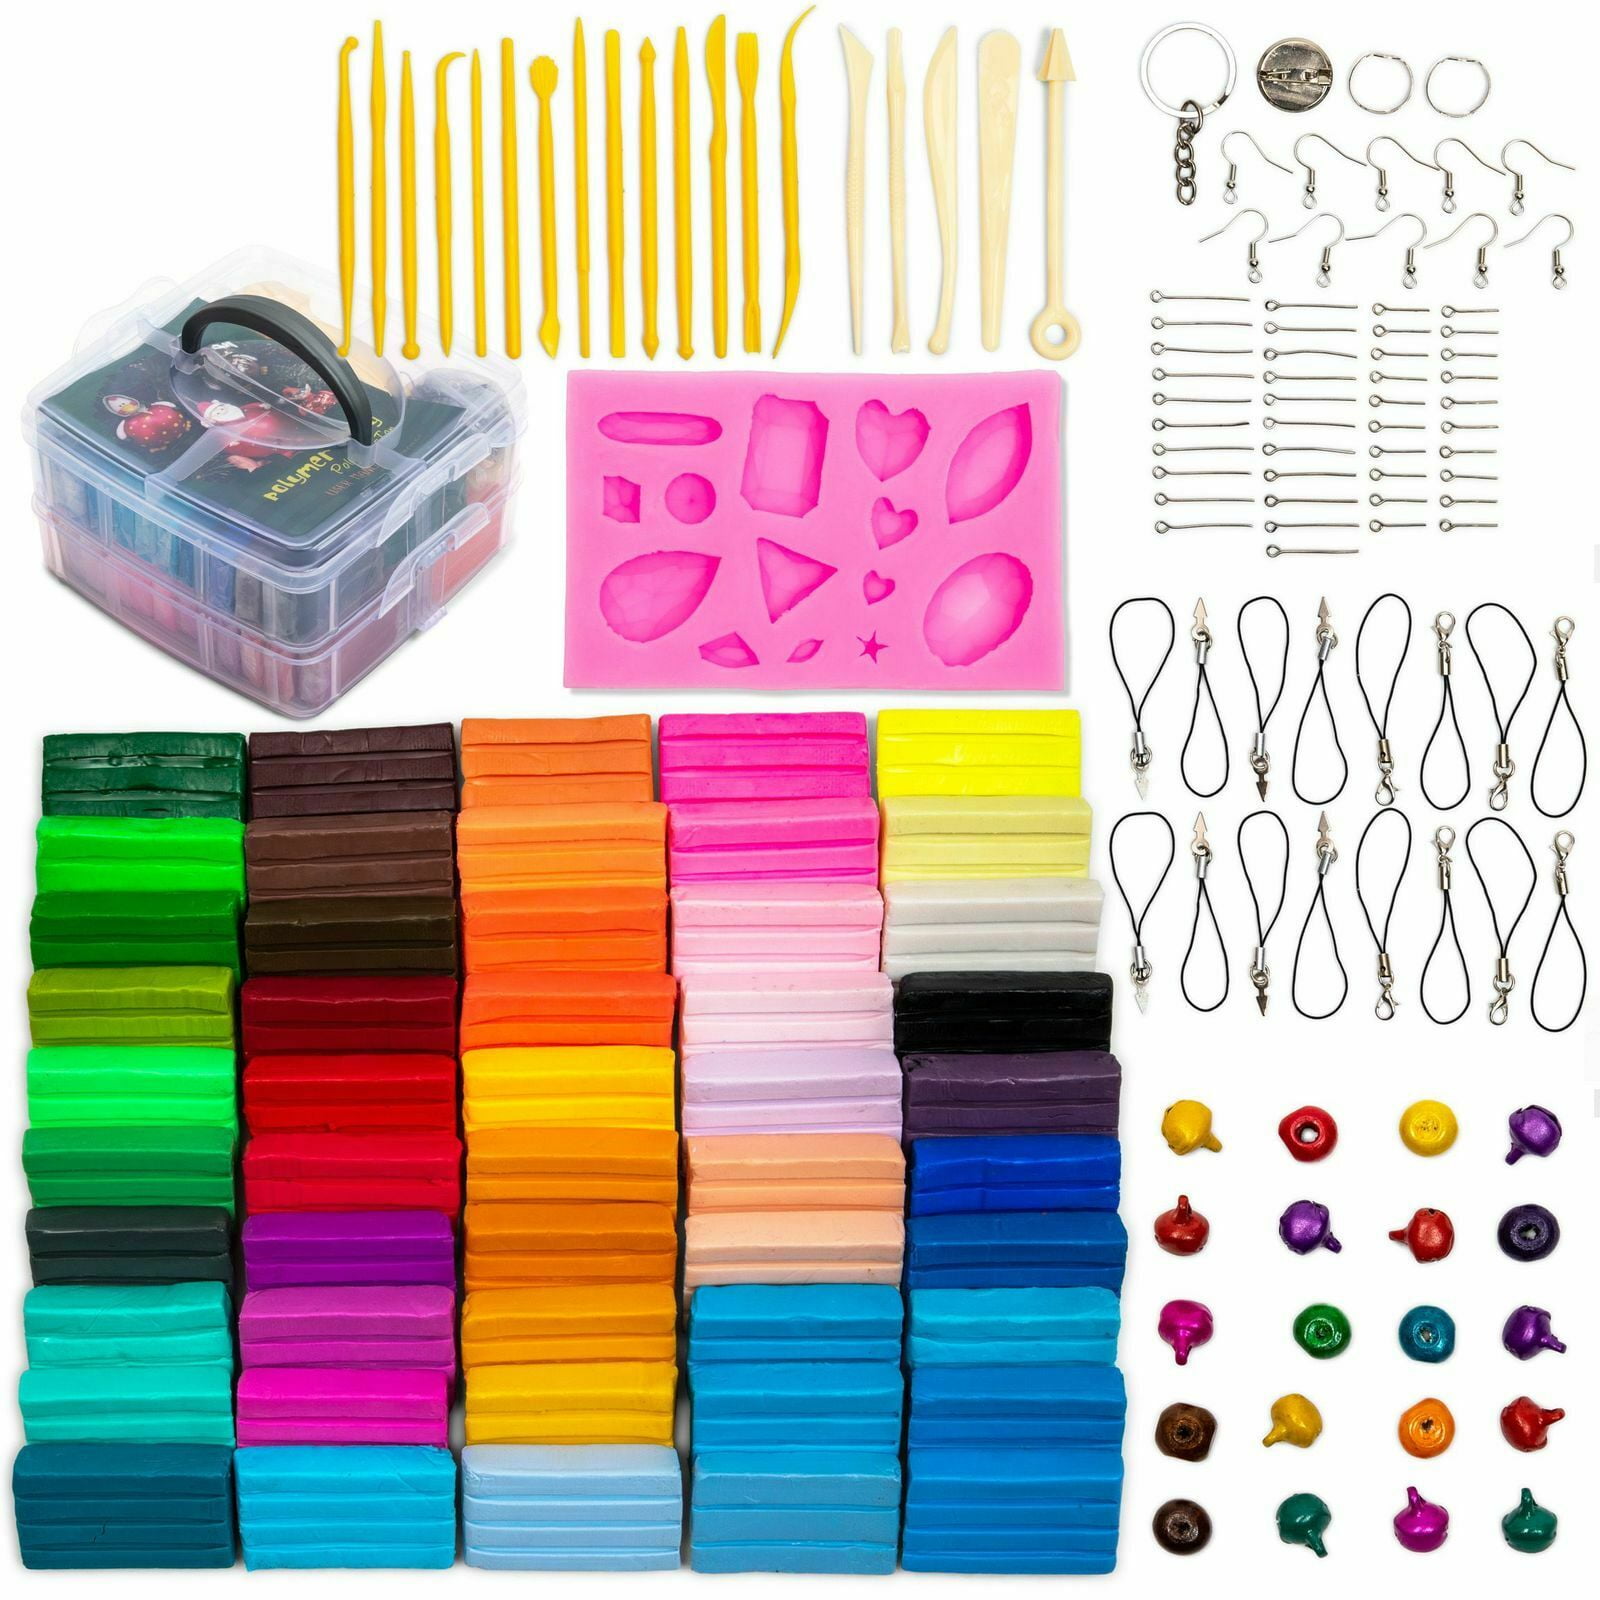 Polymer Clay Kit,DAOFARY 50 Color Modeling Clay Kit DIY Oven Bake Clay for Kids and Adults with 5 Sculpting Tools, Accessories and Portable Storage